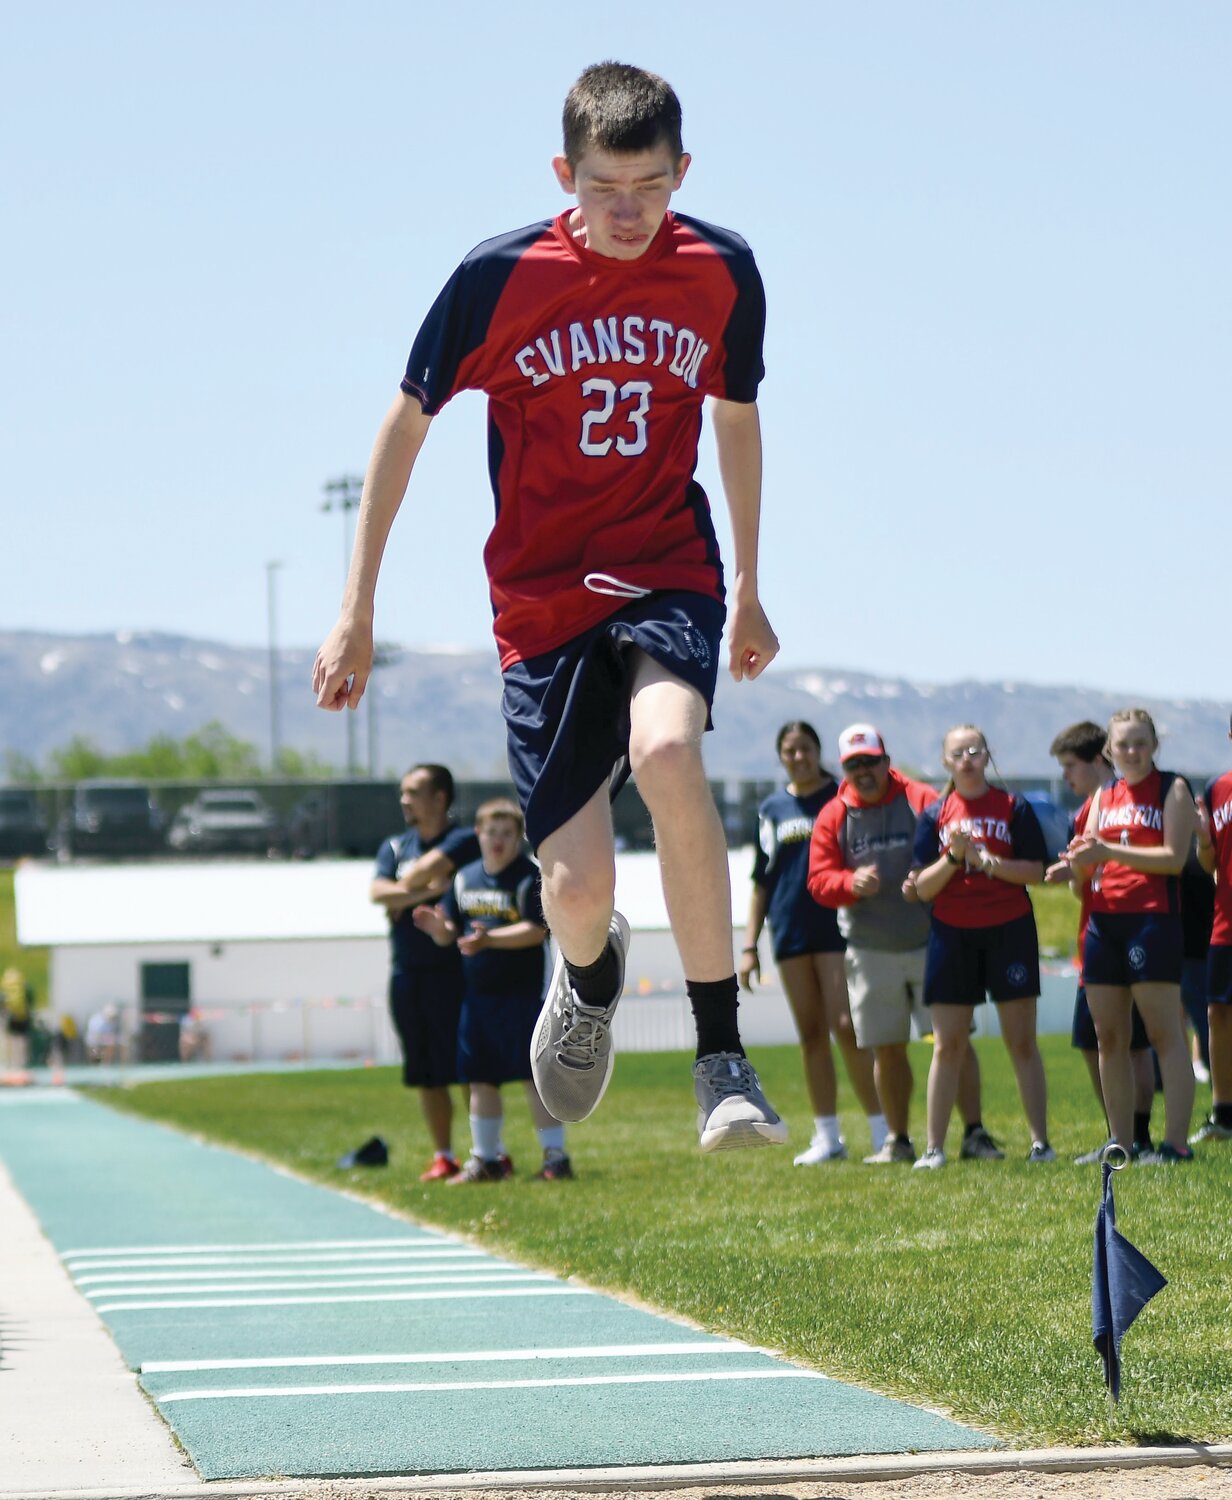 EHS unified athlete Hunter Brown shows some serious hops during the long jump at the State Unified Track and Field Championships.